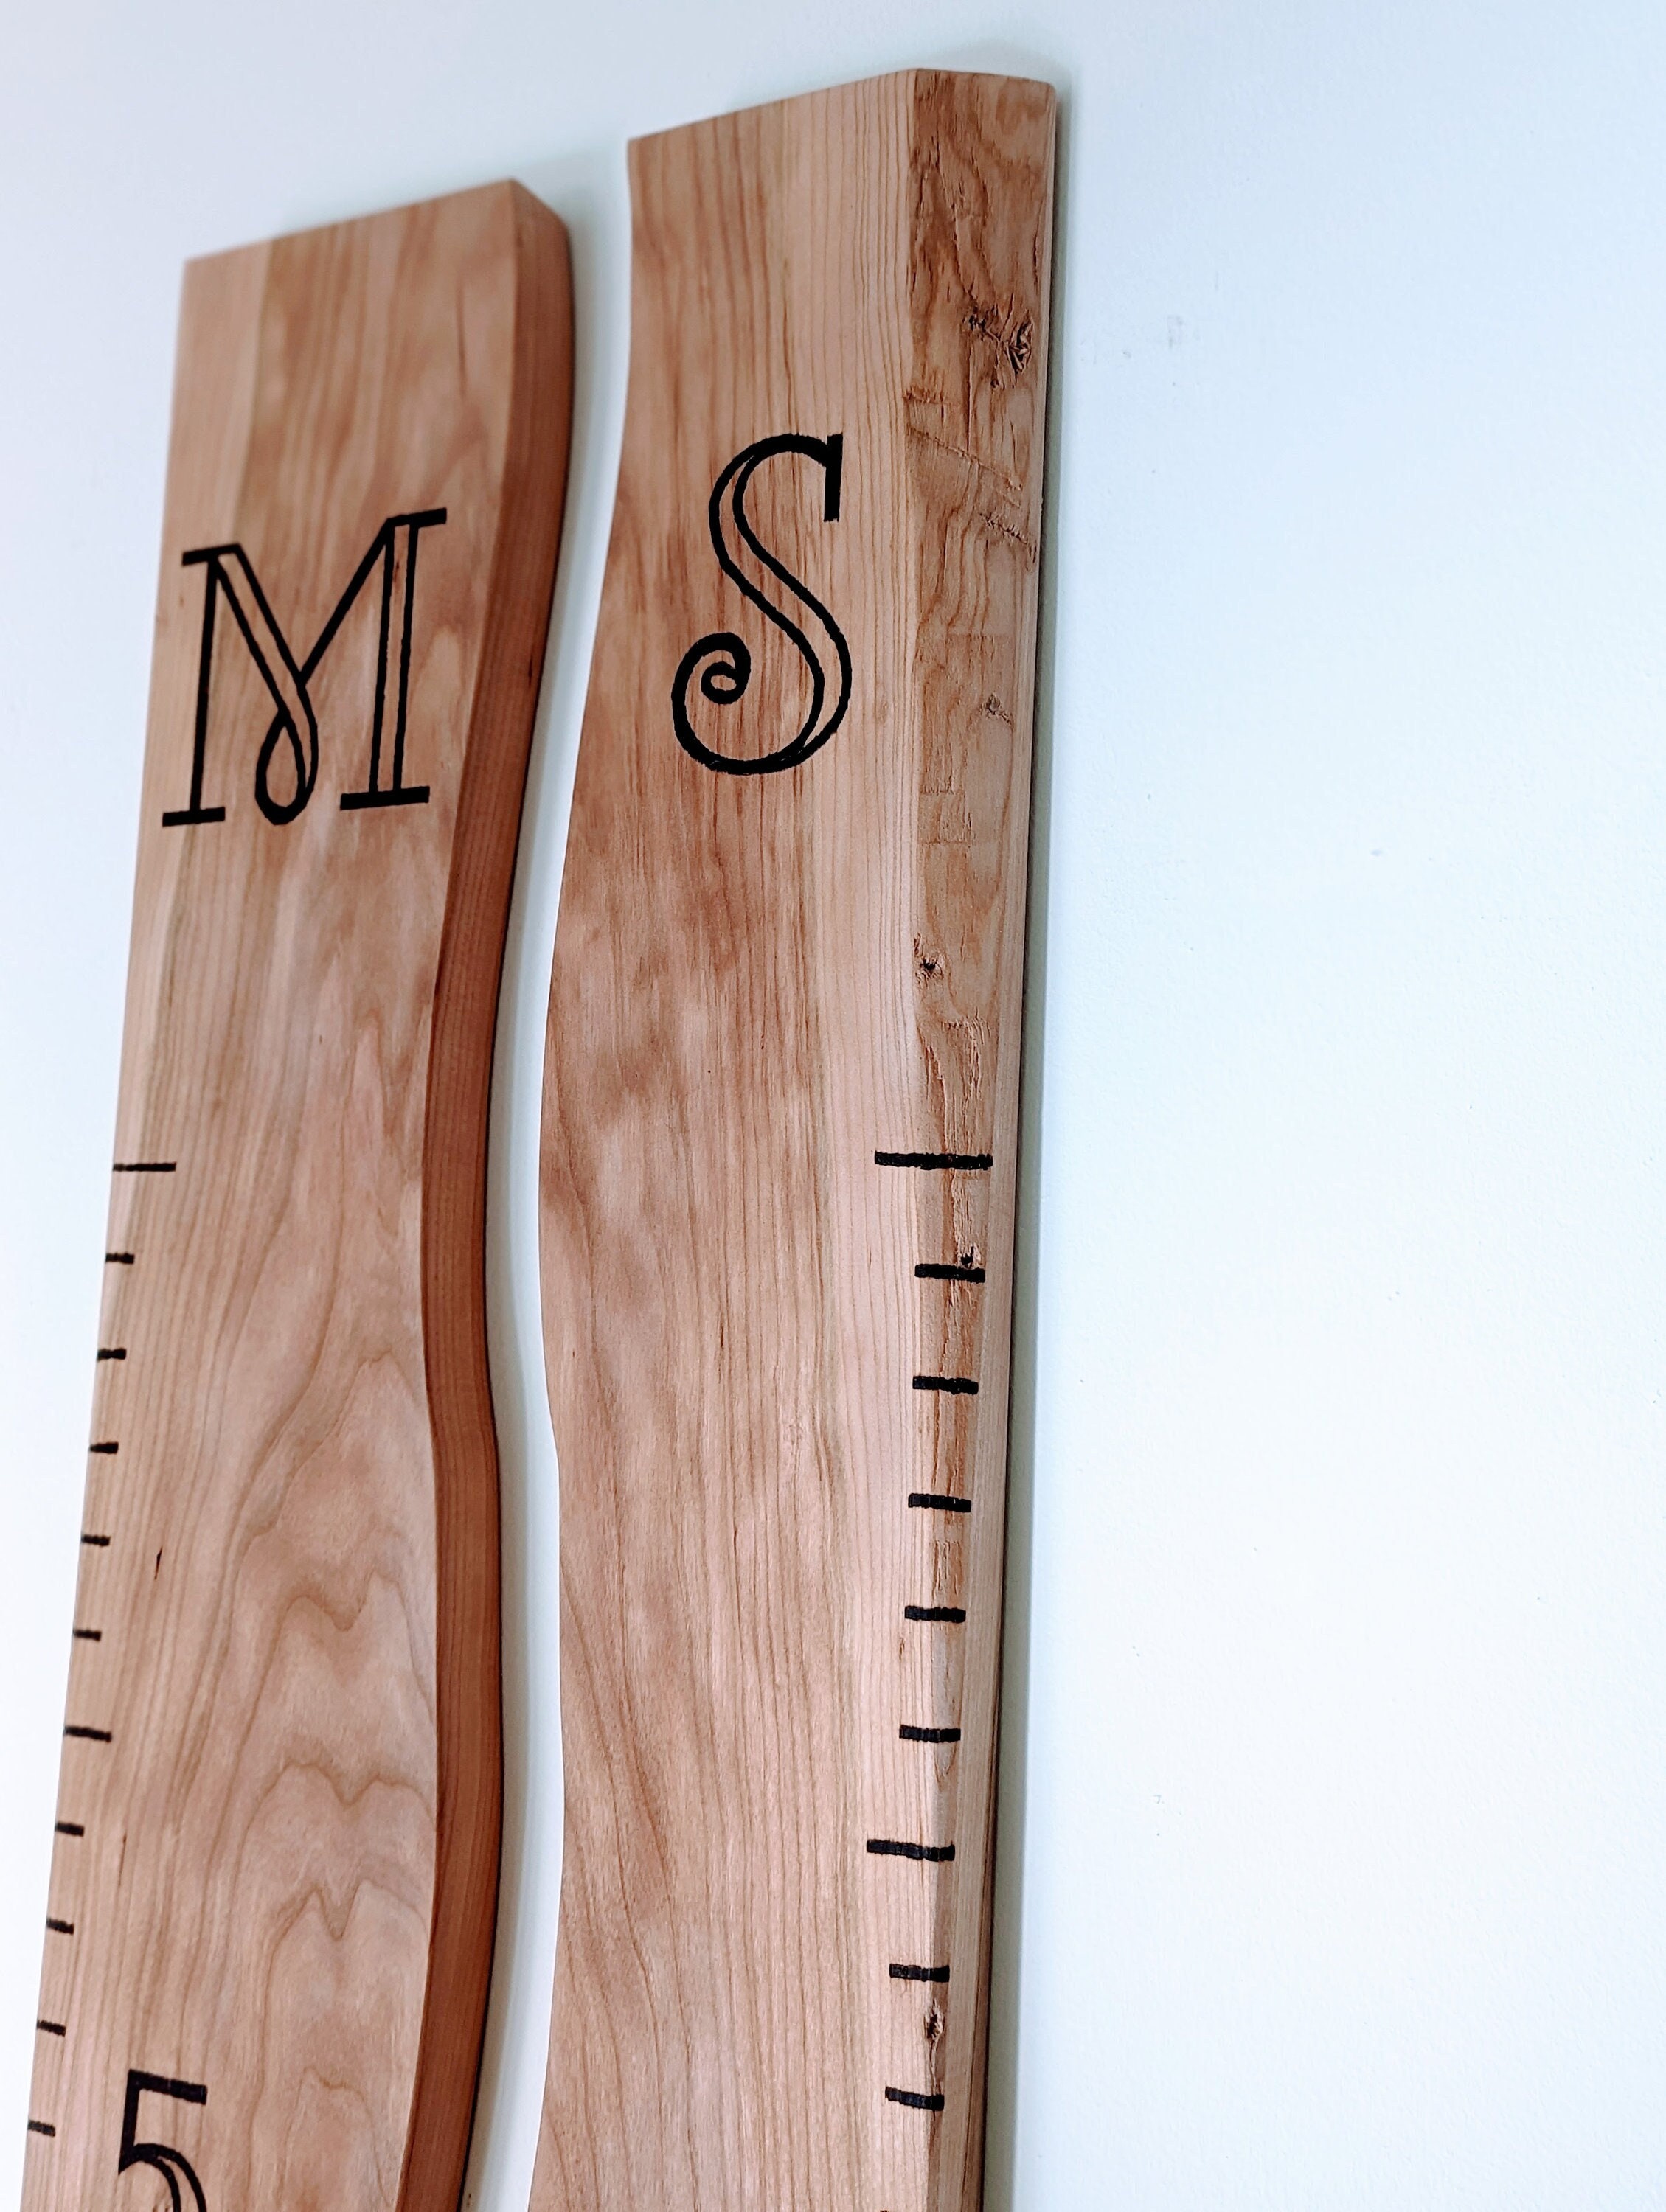 Growth Chart Ruler 3D Playroom Decor Wall Ruler Personalized Wood Growth  Chart Nursery Decor Signs Kids Wall Art Toddler Bedroom 